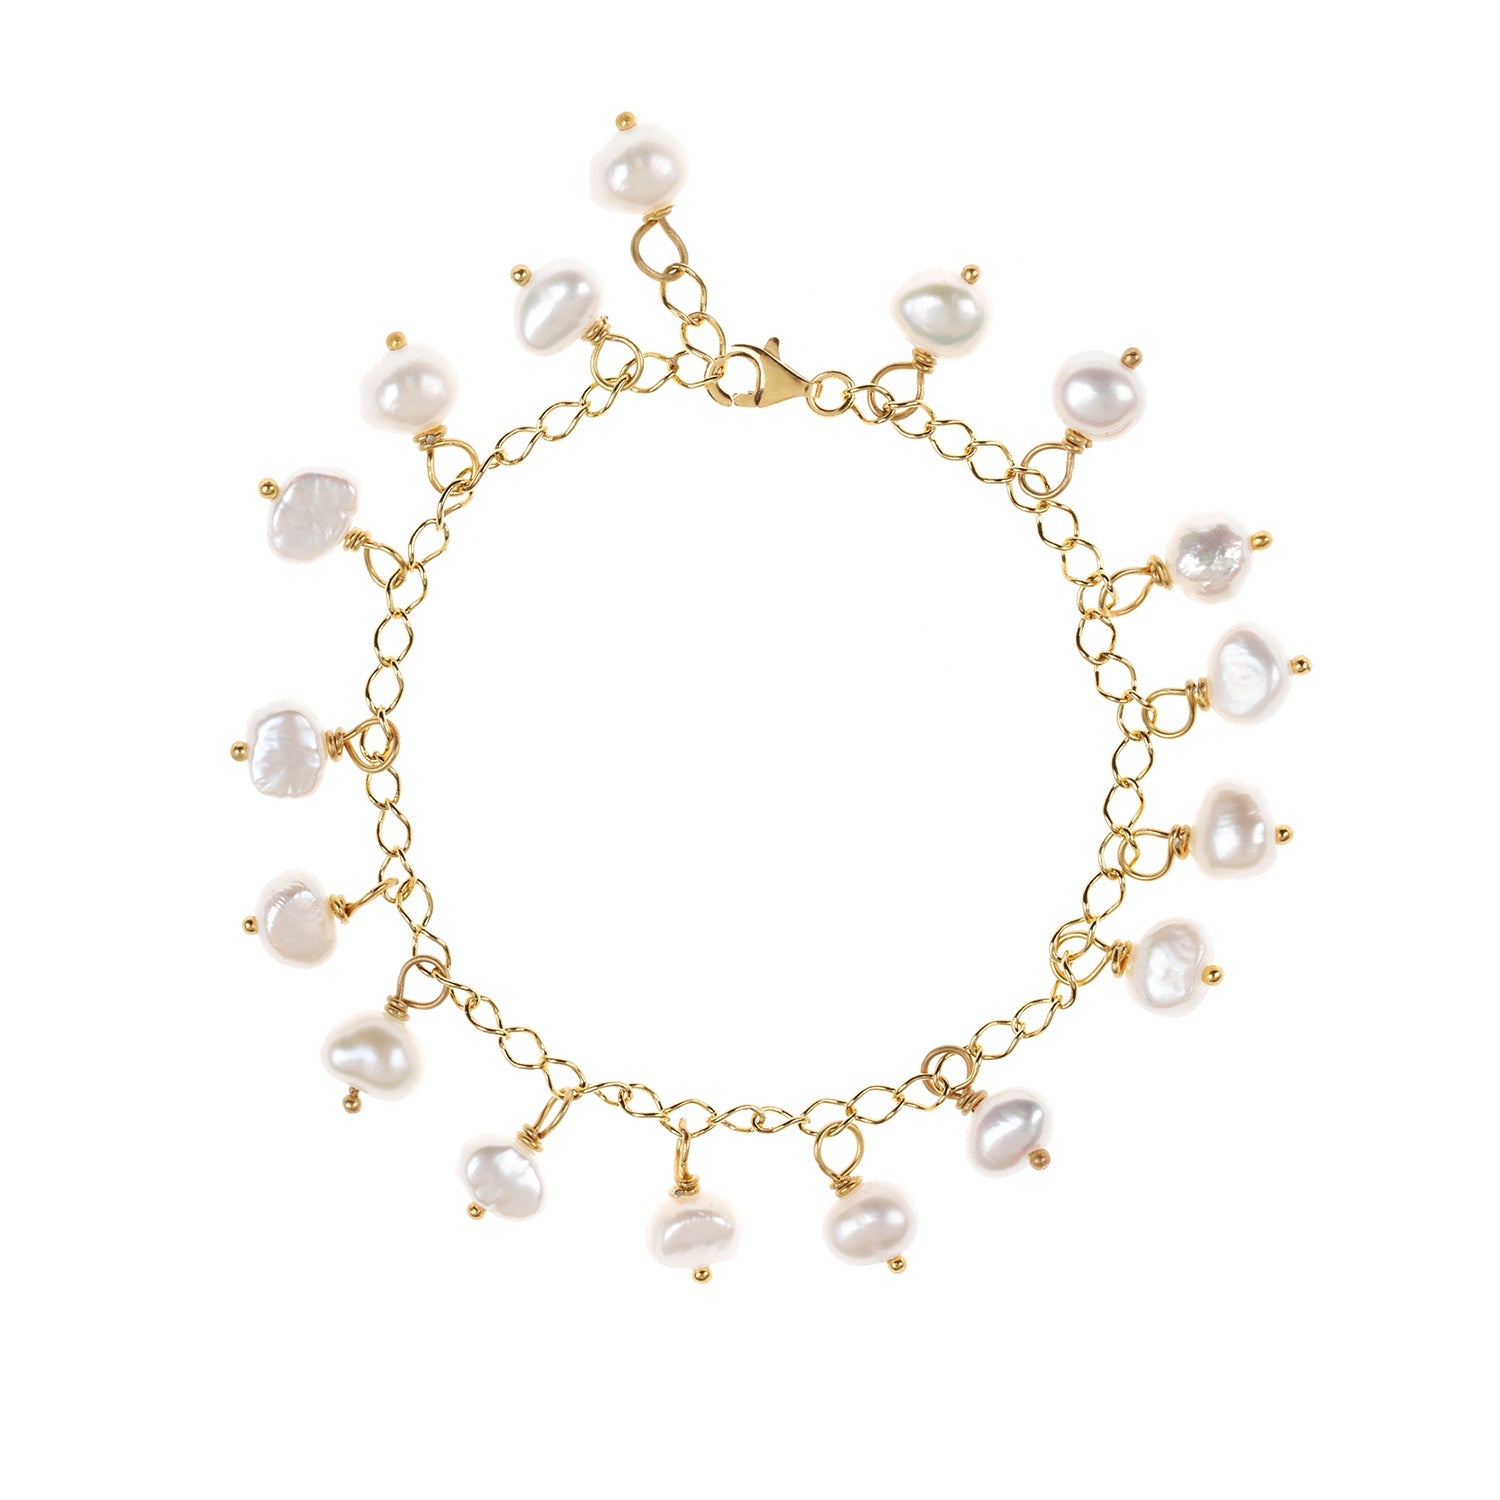 Terra Gold Chain Bracelet with White Pearls